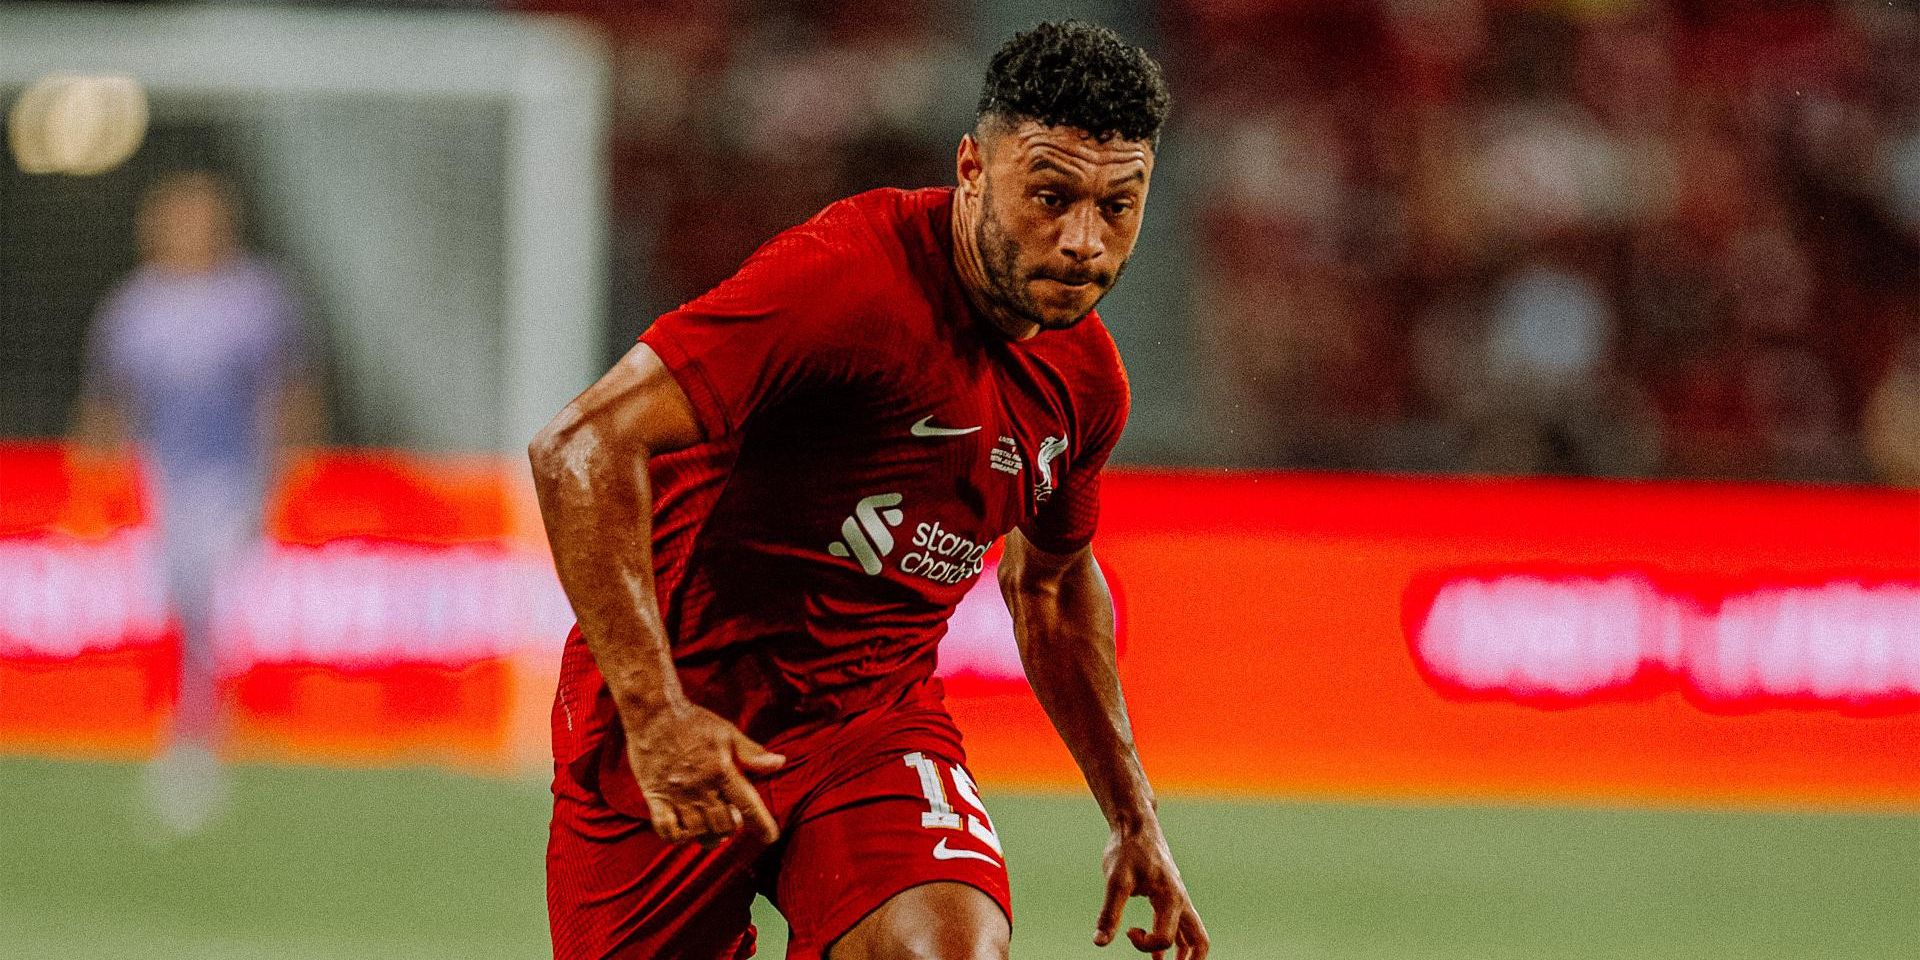 Liverpool could sell Oxlade-Chamberlain to West Ham United for ‘around £10 million in the summer transfer window’ – report